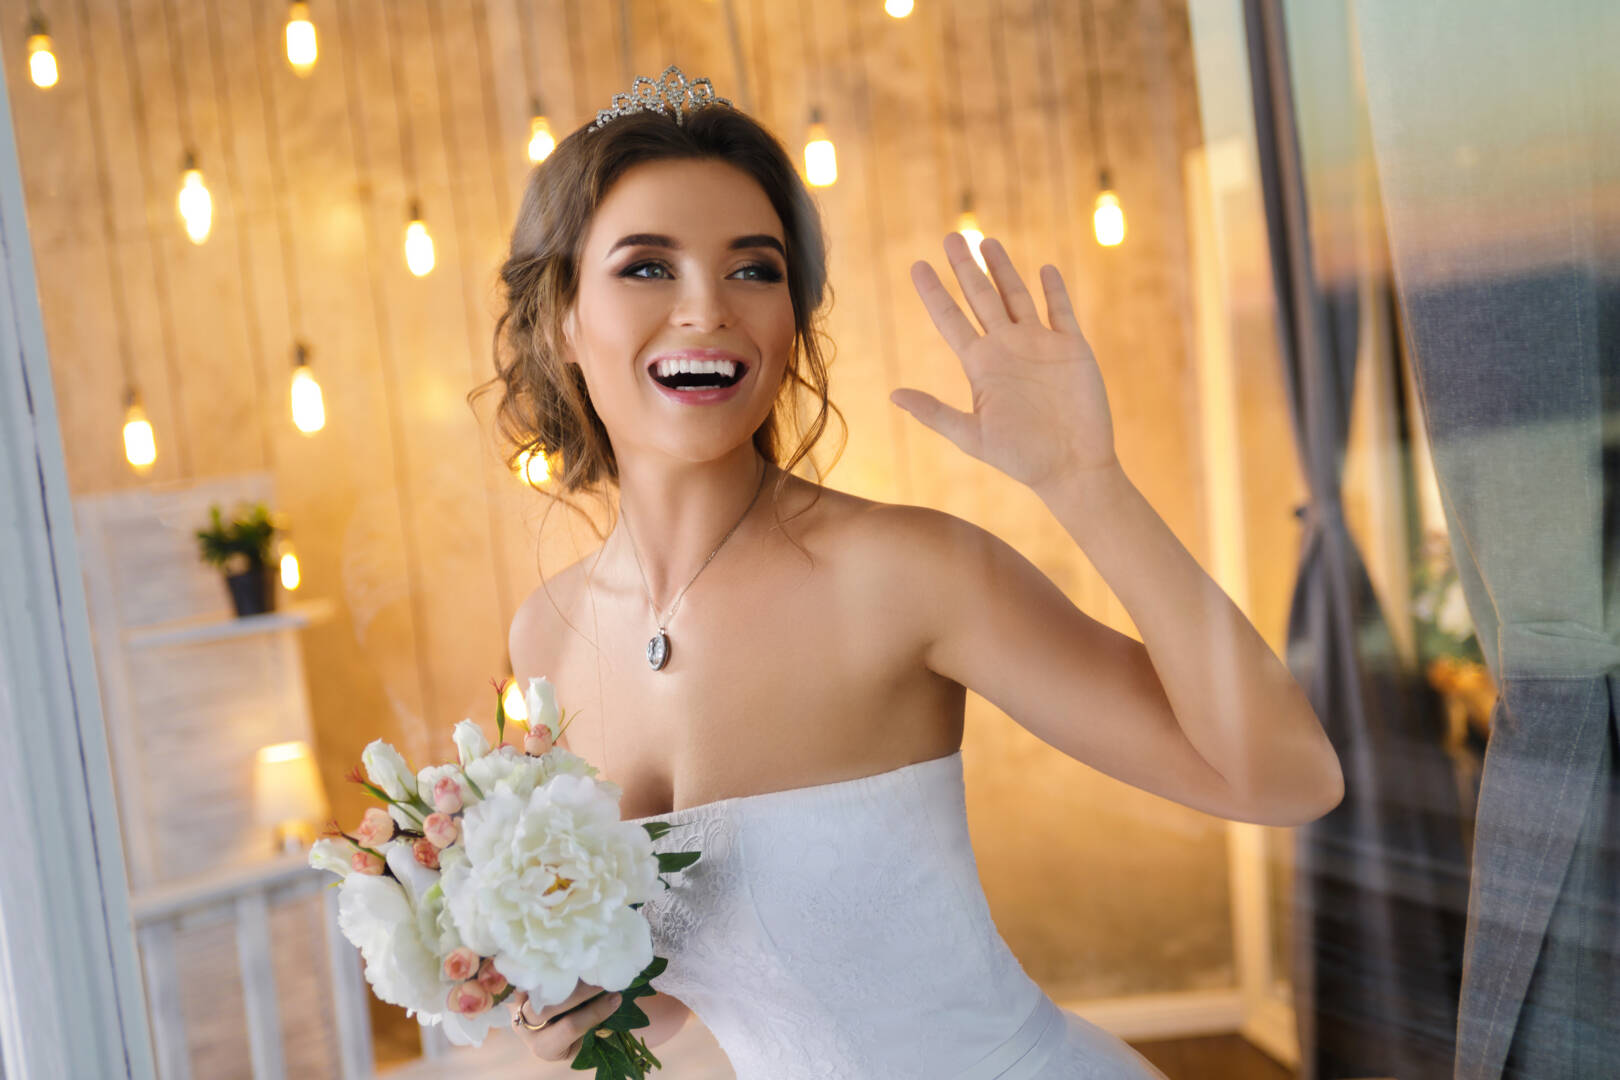 Happy and beautiful bride with bouquet of flowers